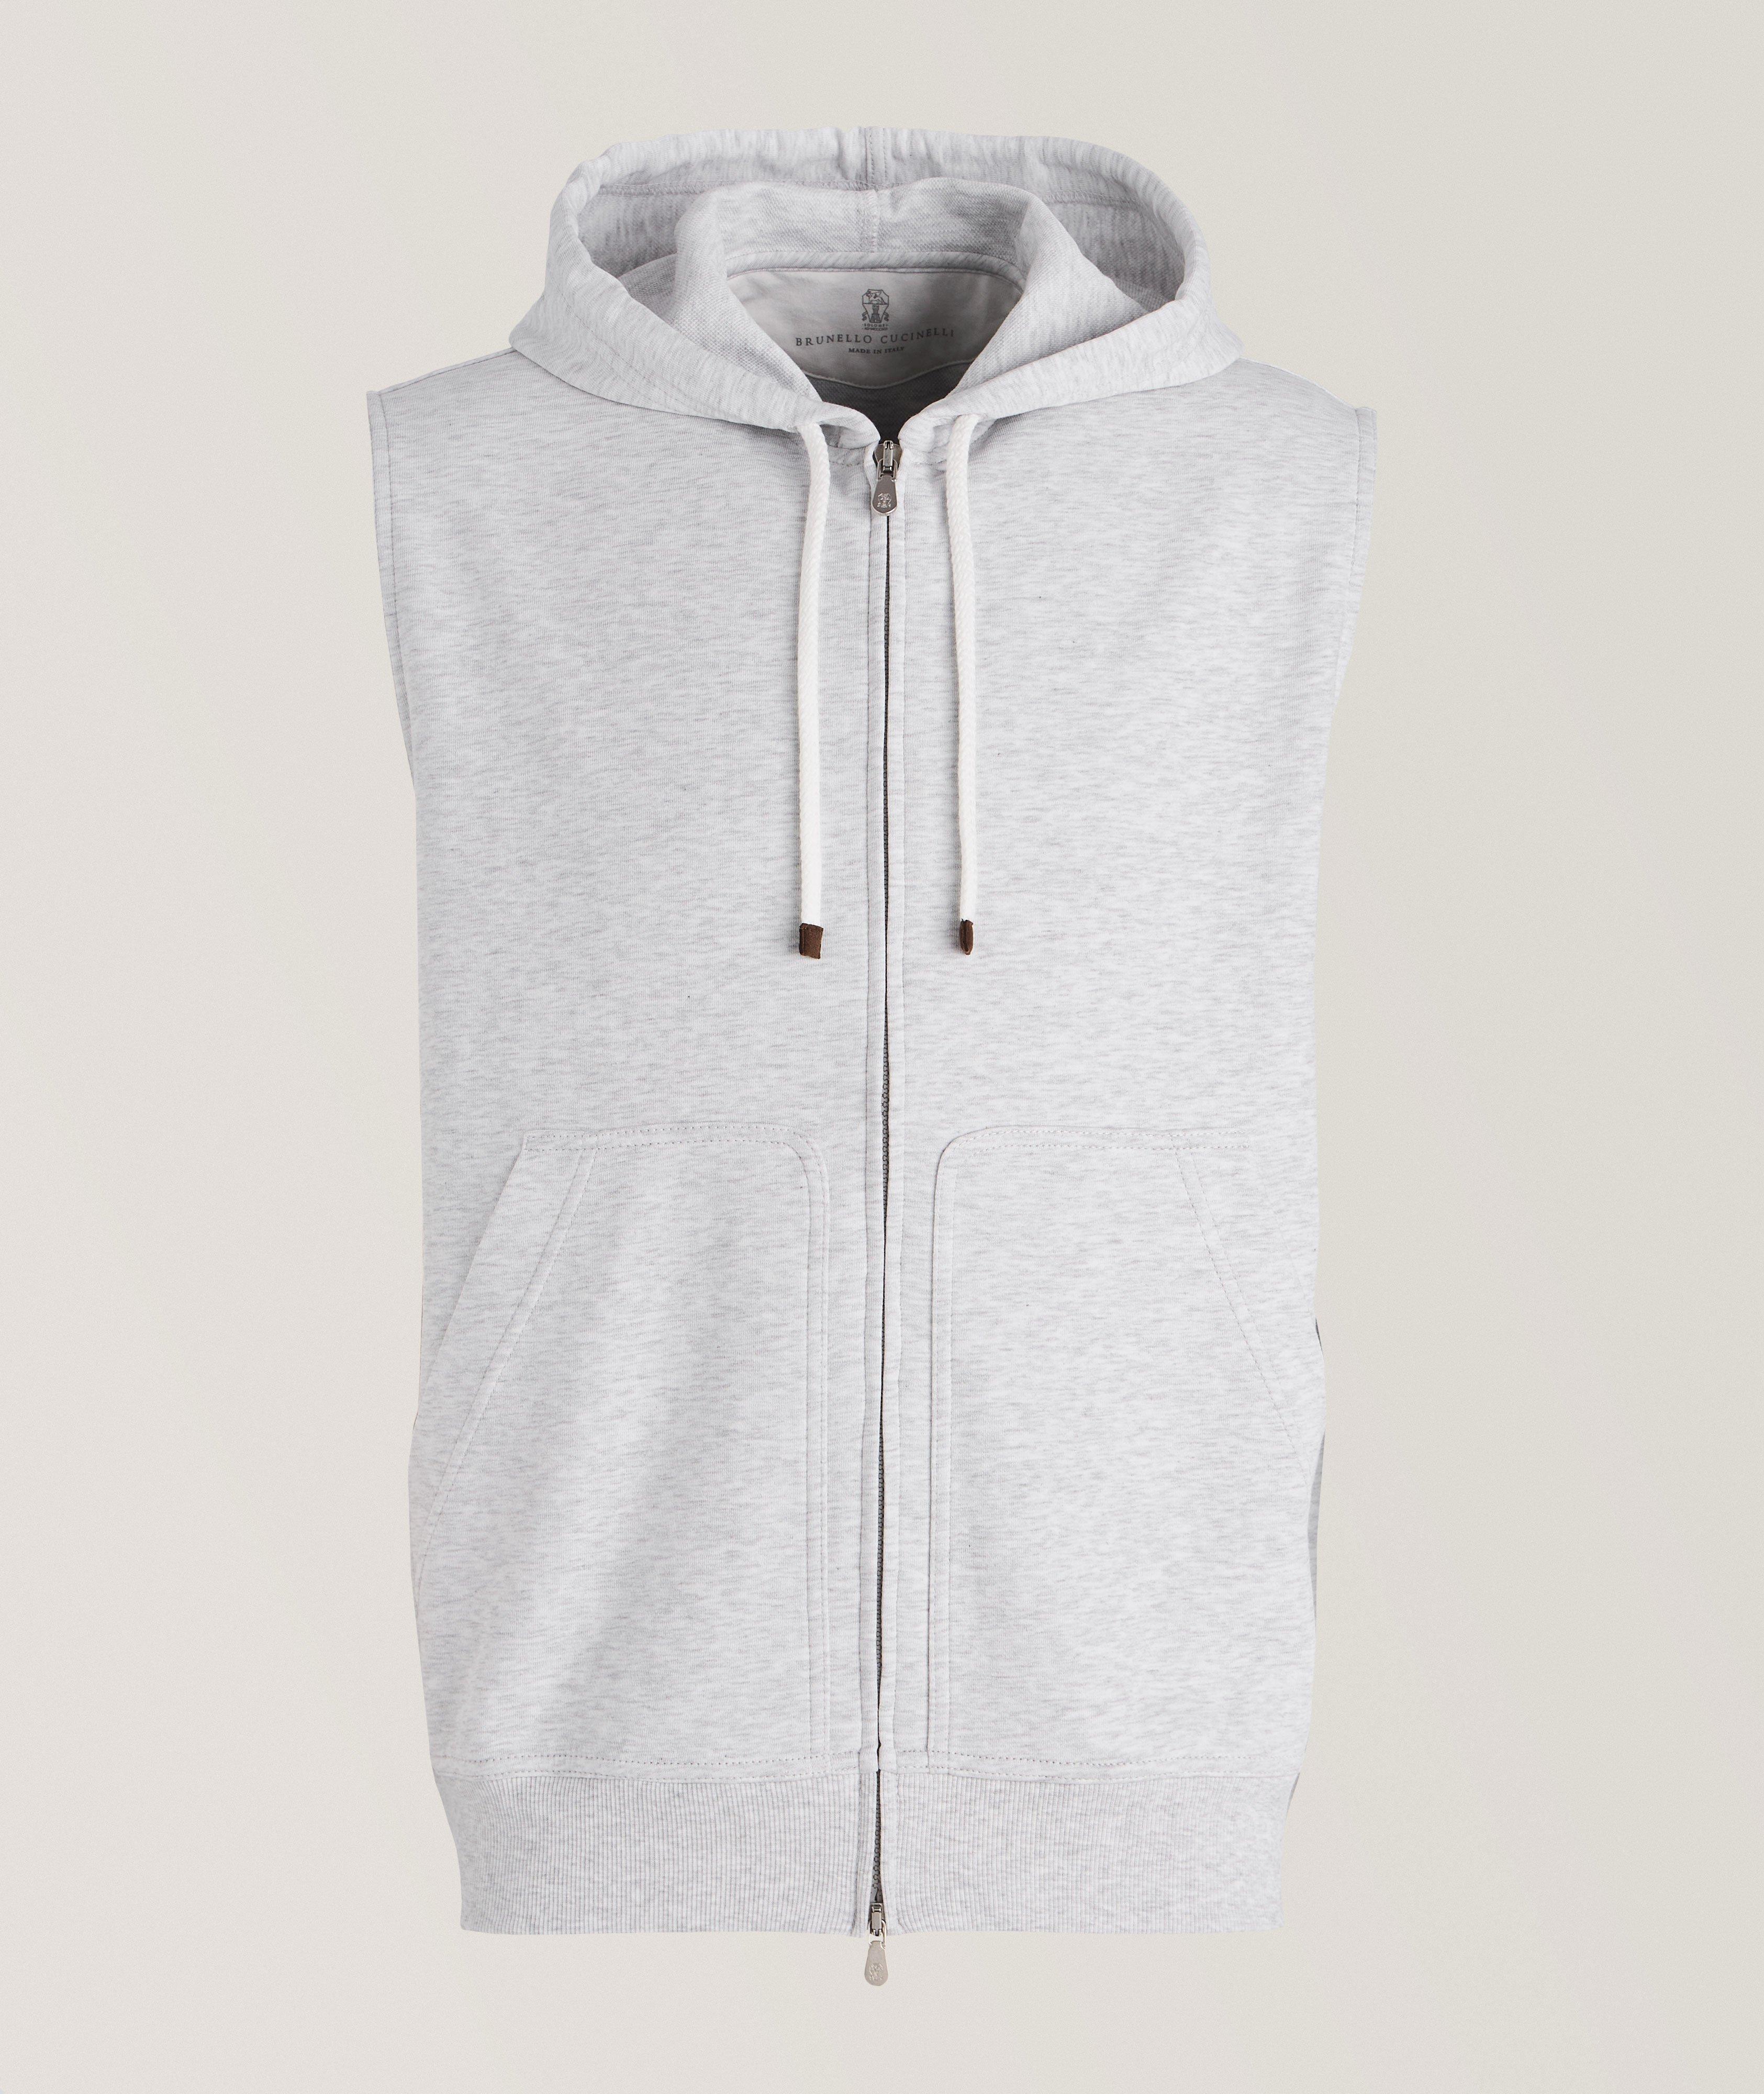 Travelwear Collection Hooded French Terry Cotton Vest